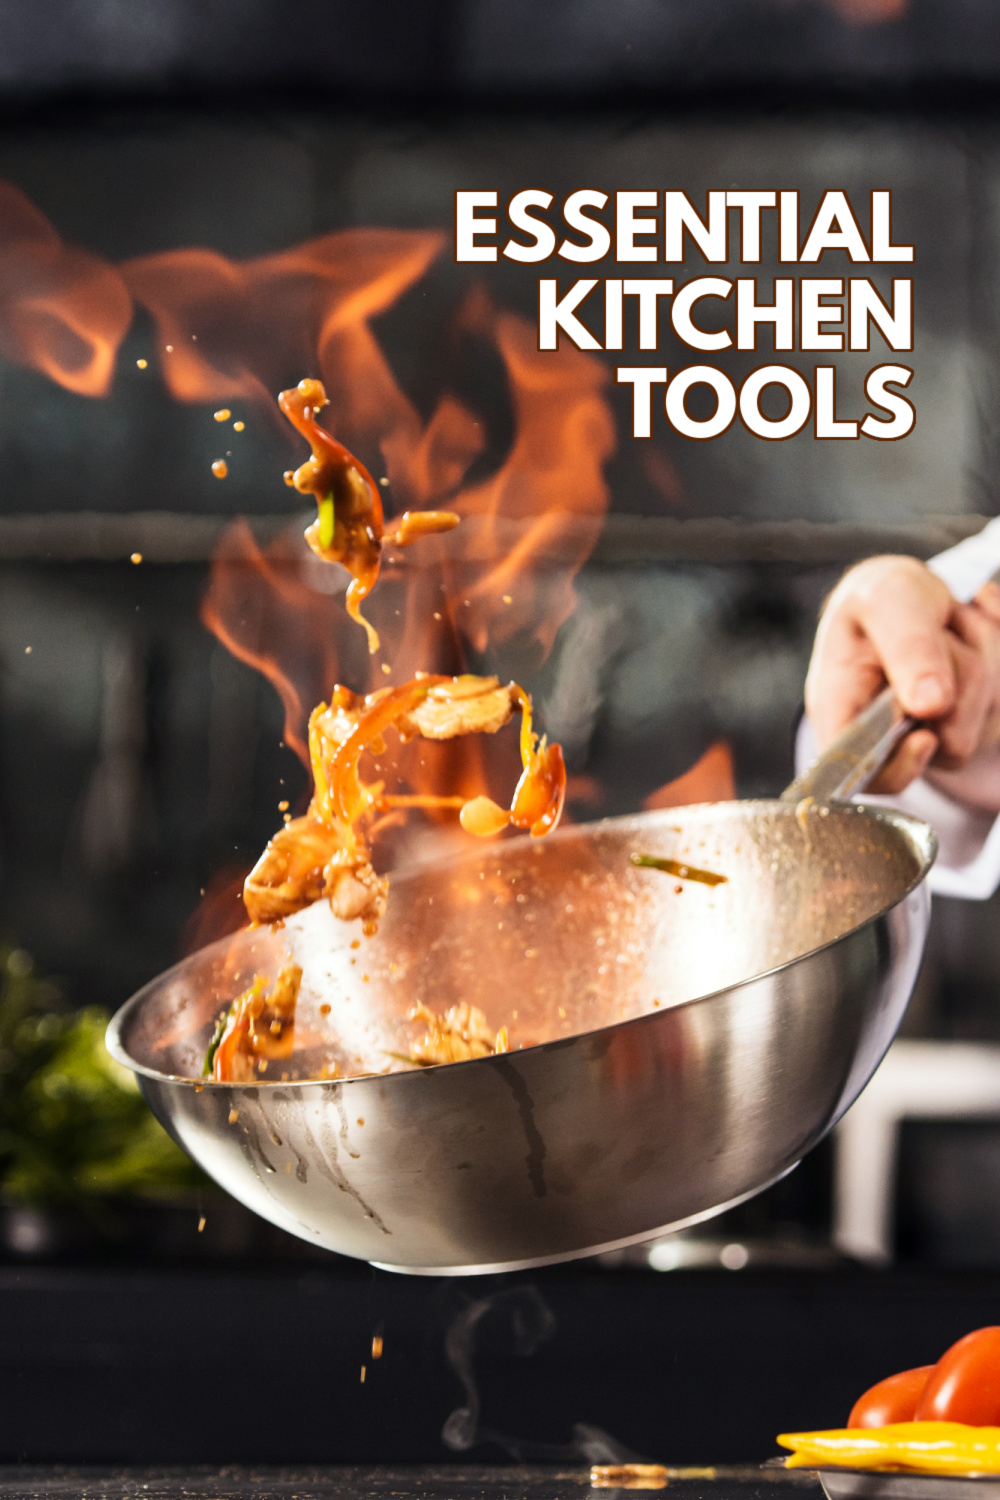 An image of a chef cooking in a wok with the words essential kitchen tools.